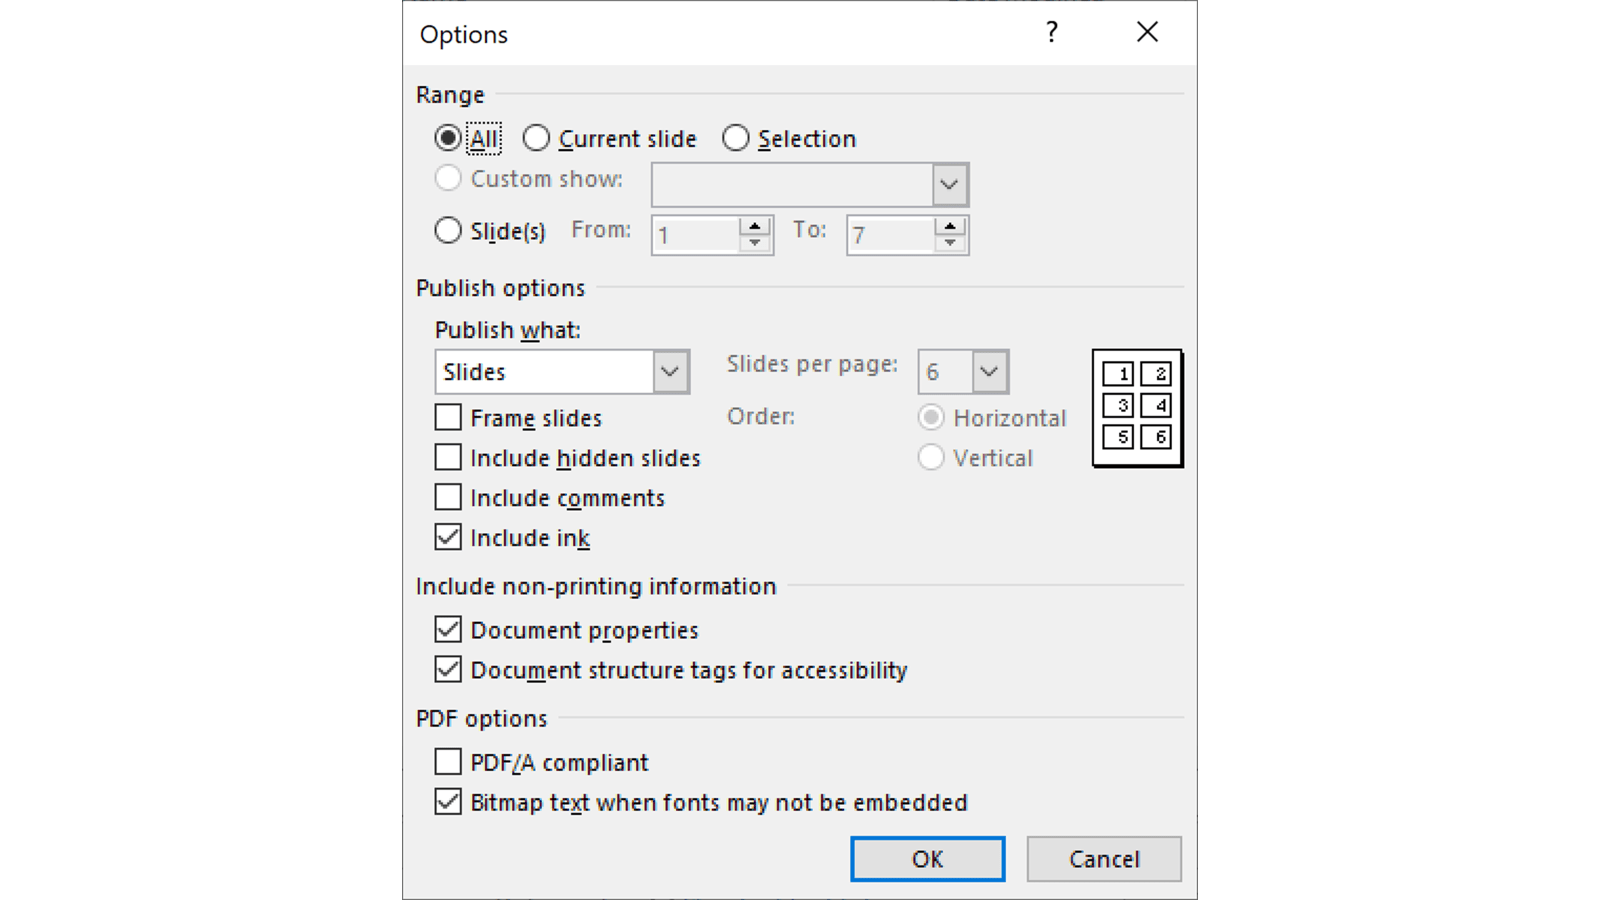 Screenshot of the Options pop up. The user can alter the Range, the have several Publish options to chose from and the ability to include non-printing infomation, there are also PDF options. 